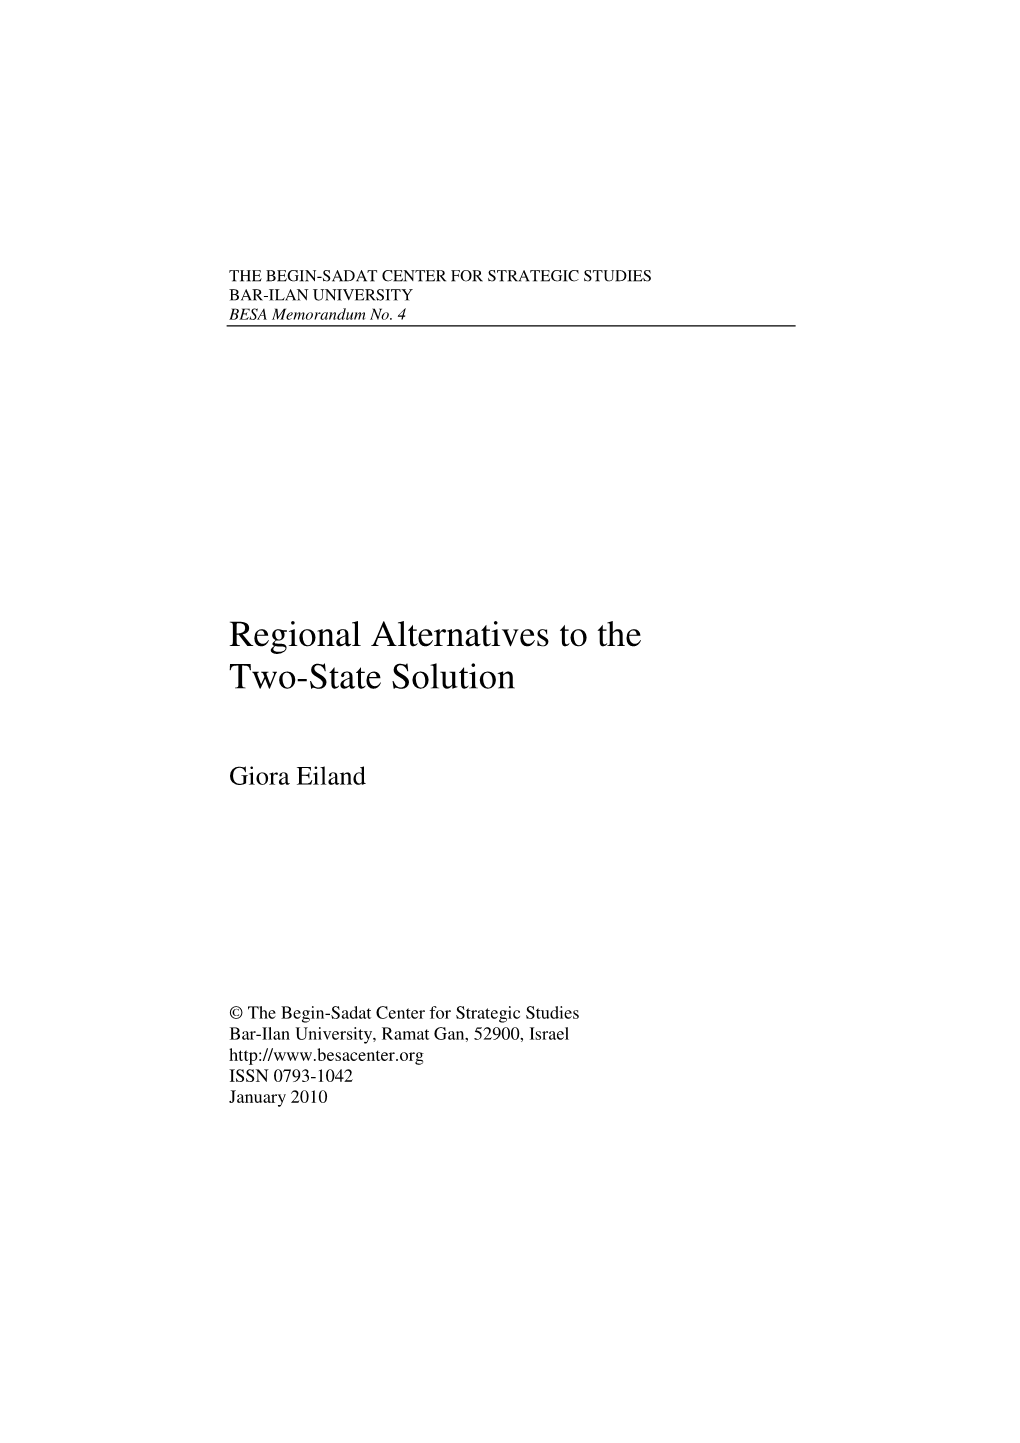 Regional Alternatives to the Two-State Solution